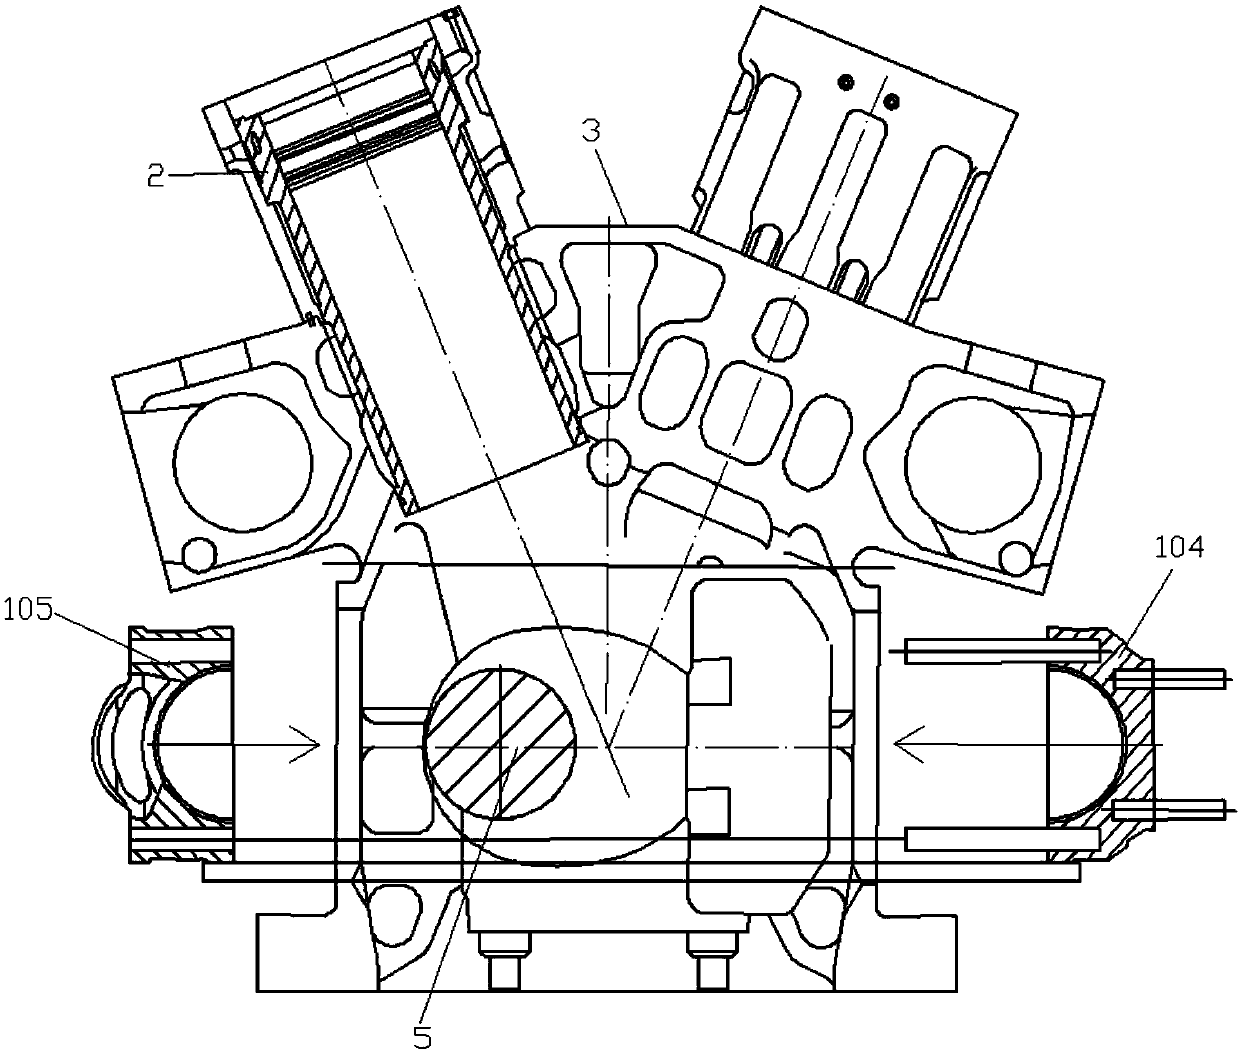 Protecting device and method for preventing cylinder sleeve from being pull-damaged when piston and connecting rod assembly of diesel engine is assembled and disassembled